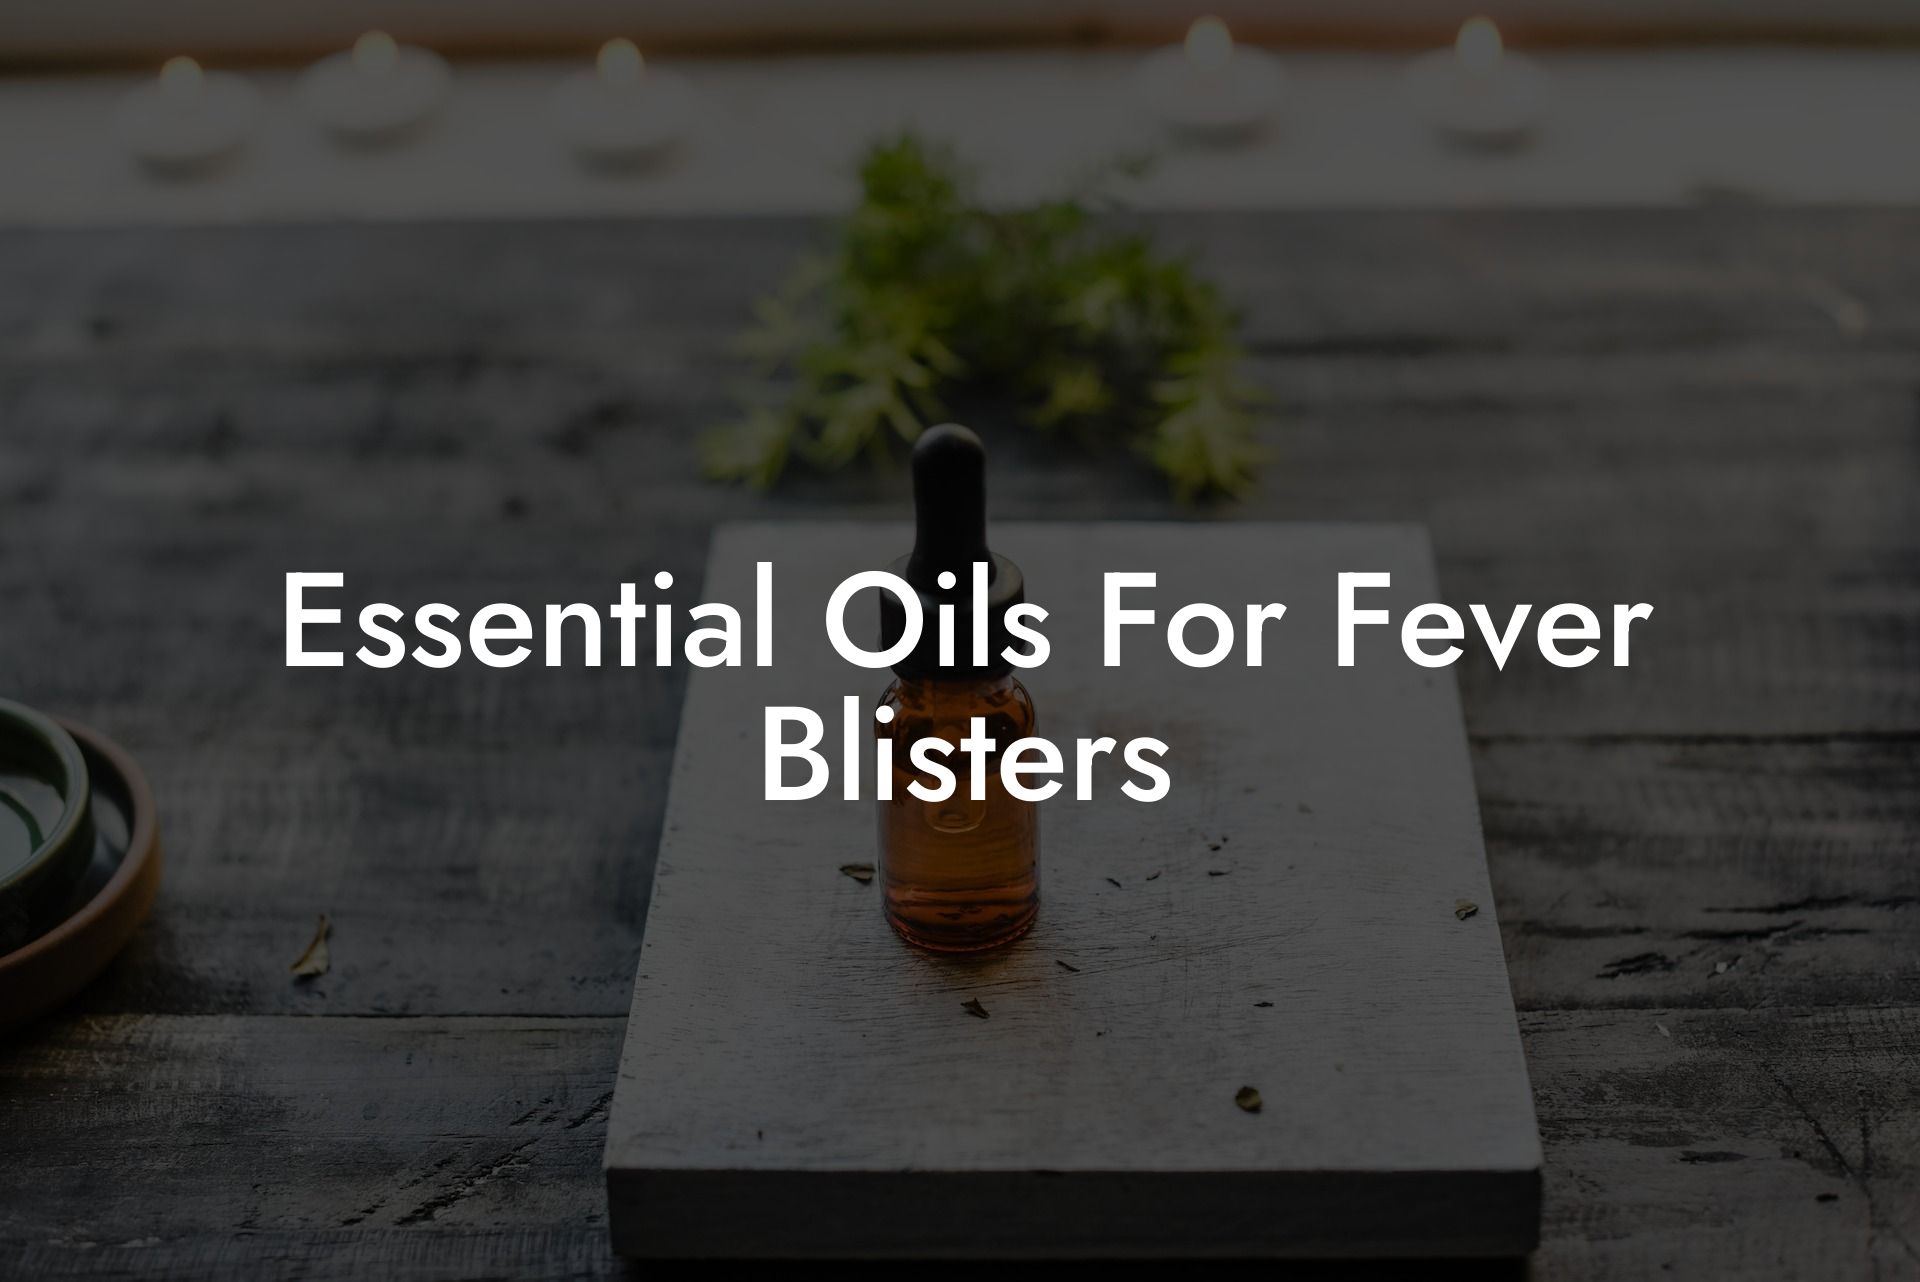 Essential Oils For Fever Blisters